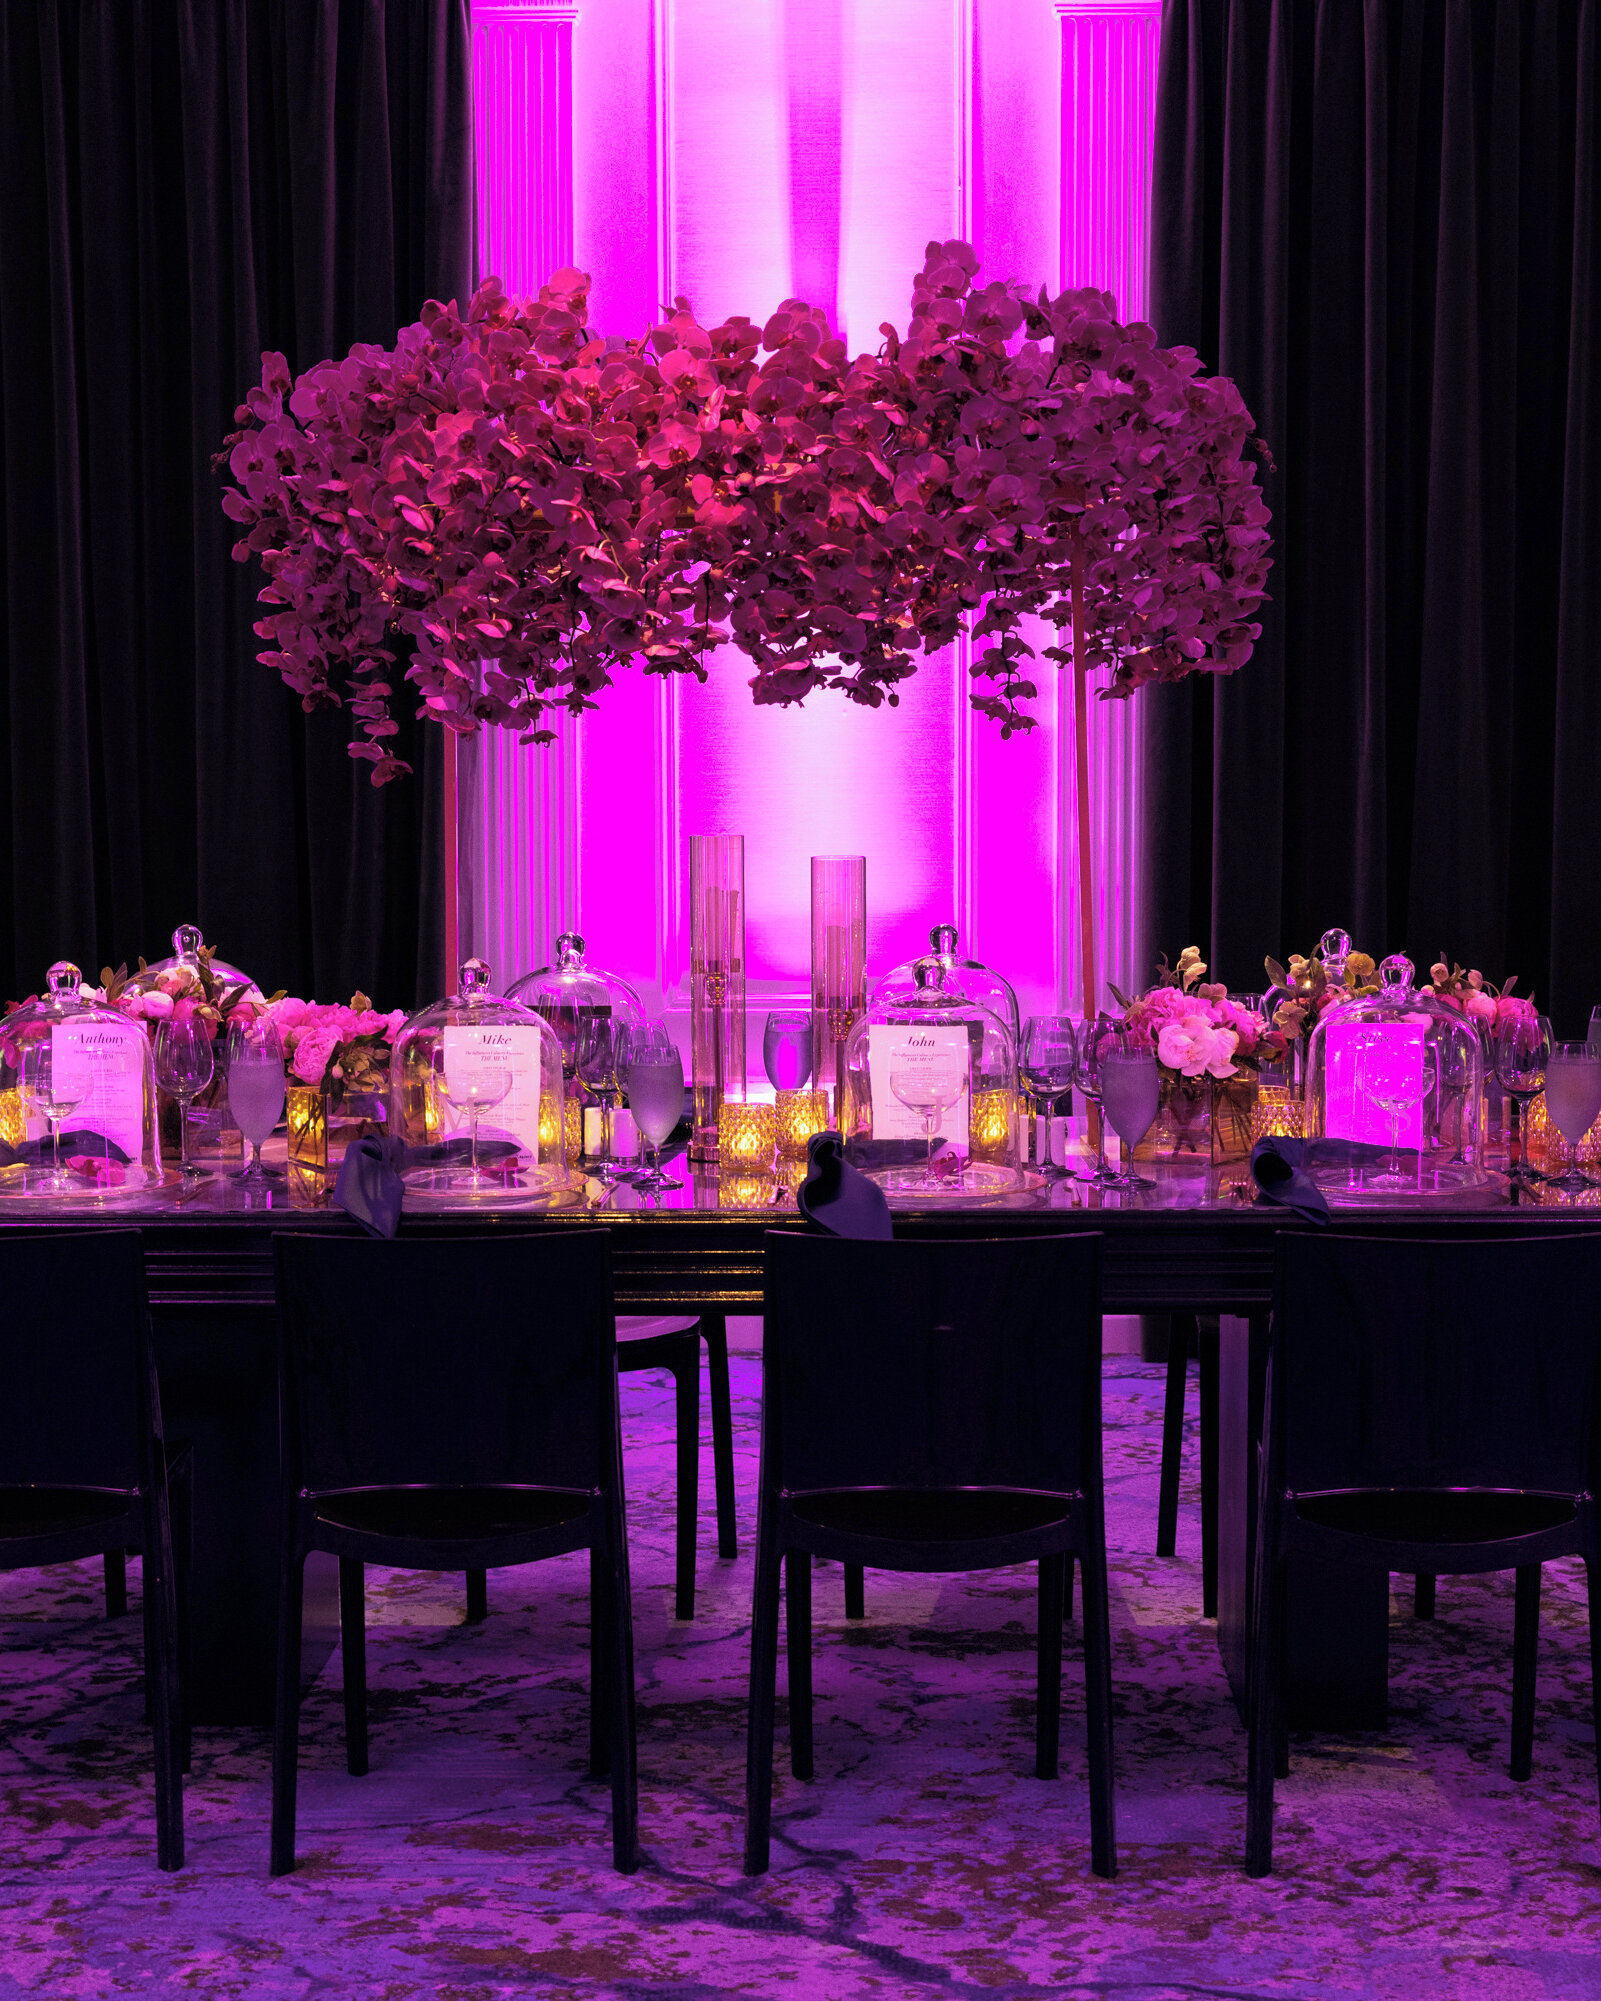 We love a monochromatic moment 😍 Pick a color and infuse it into your florals, stationery, lighting, place settings, and specialty decor to create monotone magic ✨ (Photos: @kerry_brett, Venue: @thenewburyboston)⁣⁣⁣⁣⁣⁣⁣
.⁣⁣⁣⁣⁣⁣⁣
.⁣⁣⁣⁣⁣⁣⁣
.⁣⁣⁣⁣⁣⁣⁣
#a